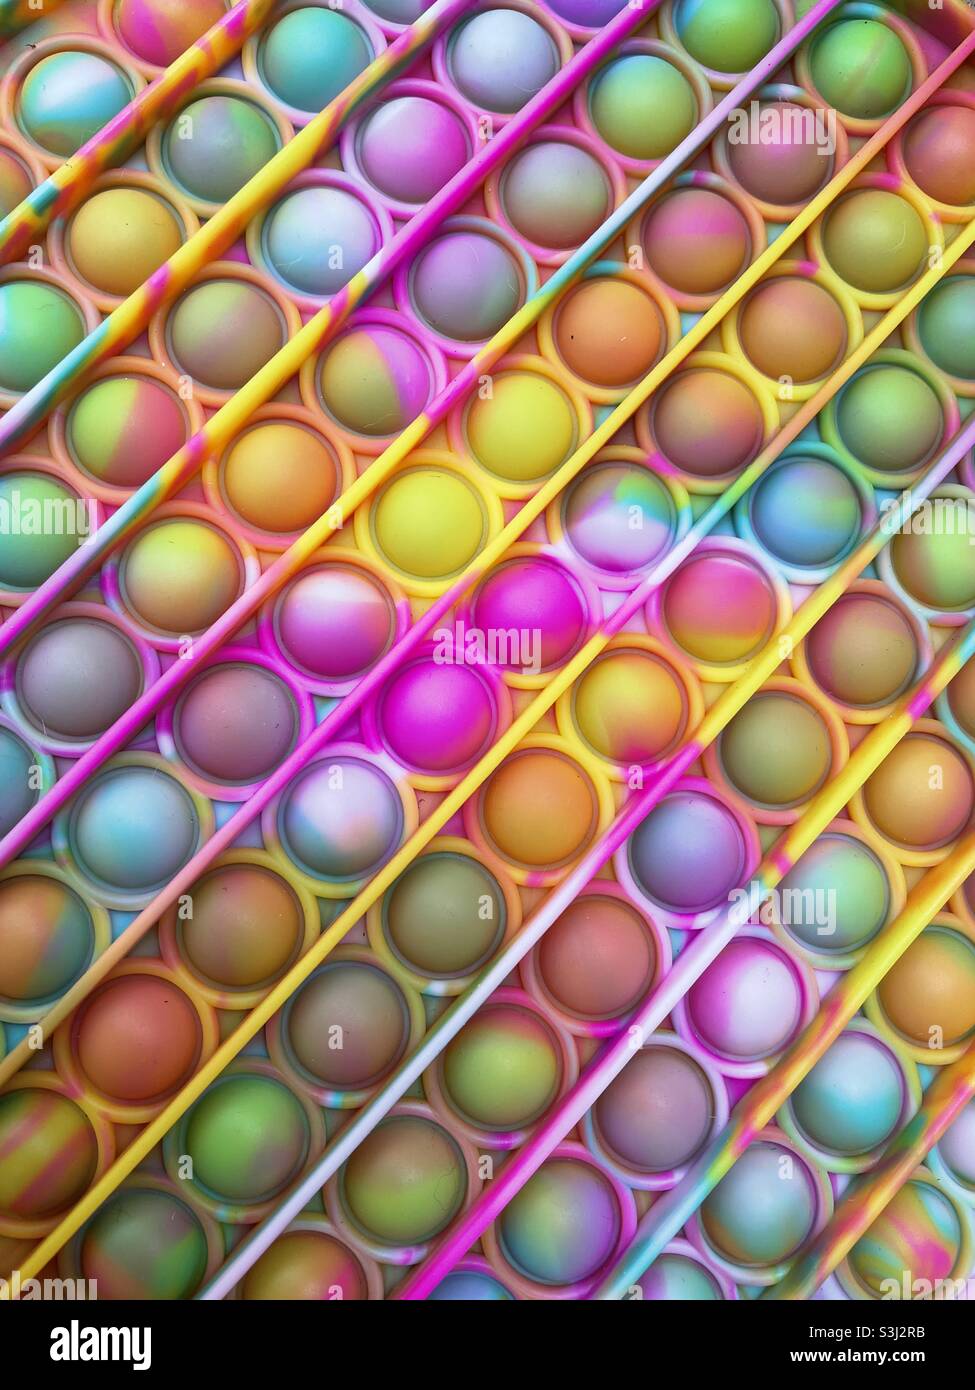 Abstract background of popular pop it toy for children Stock Photo